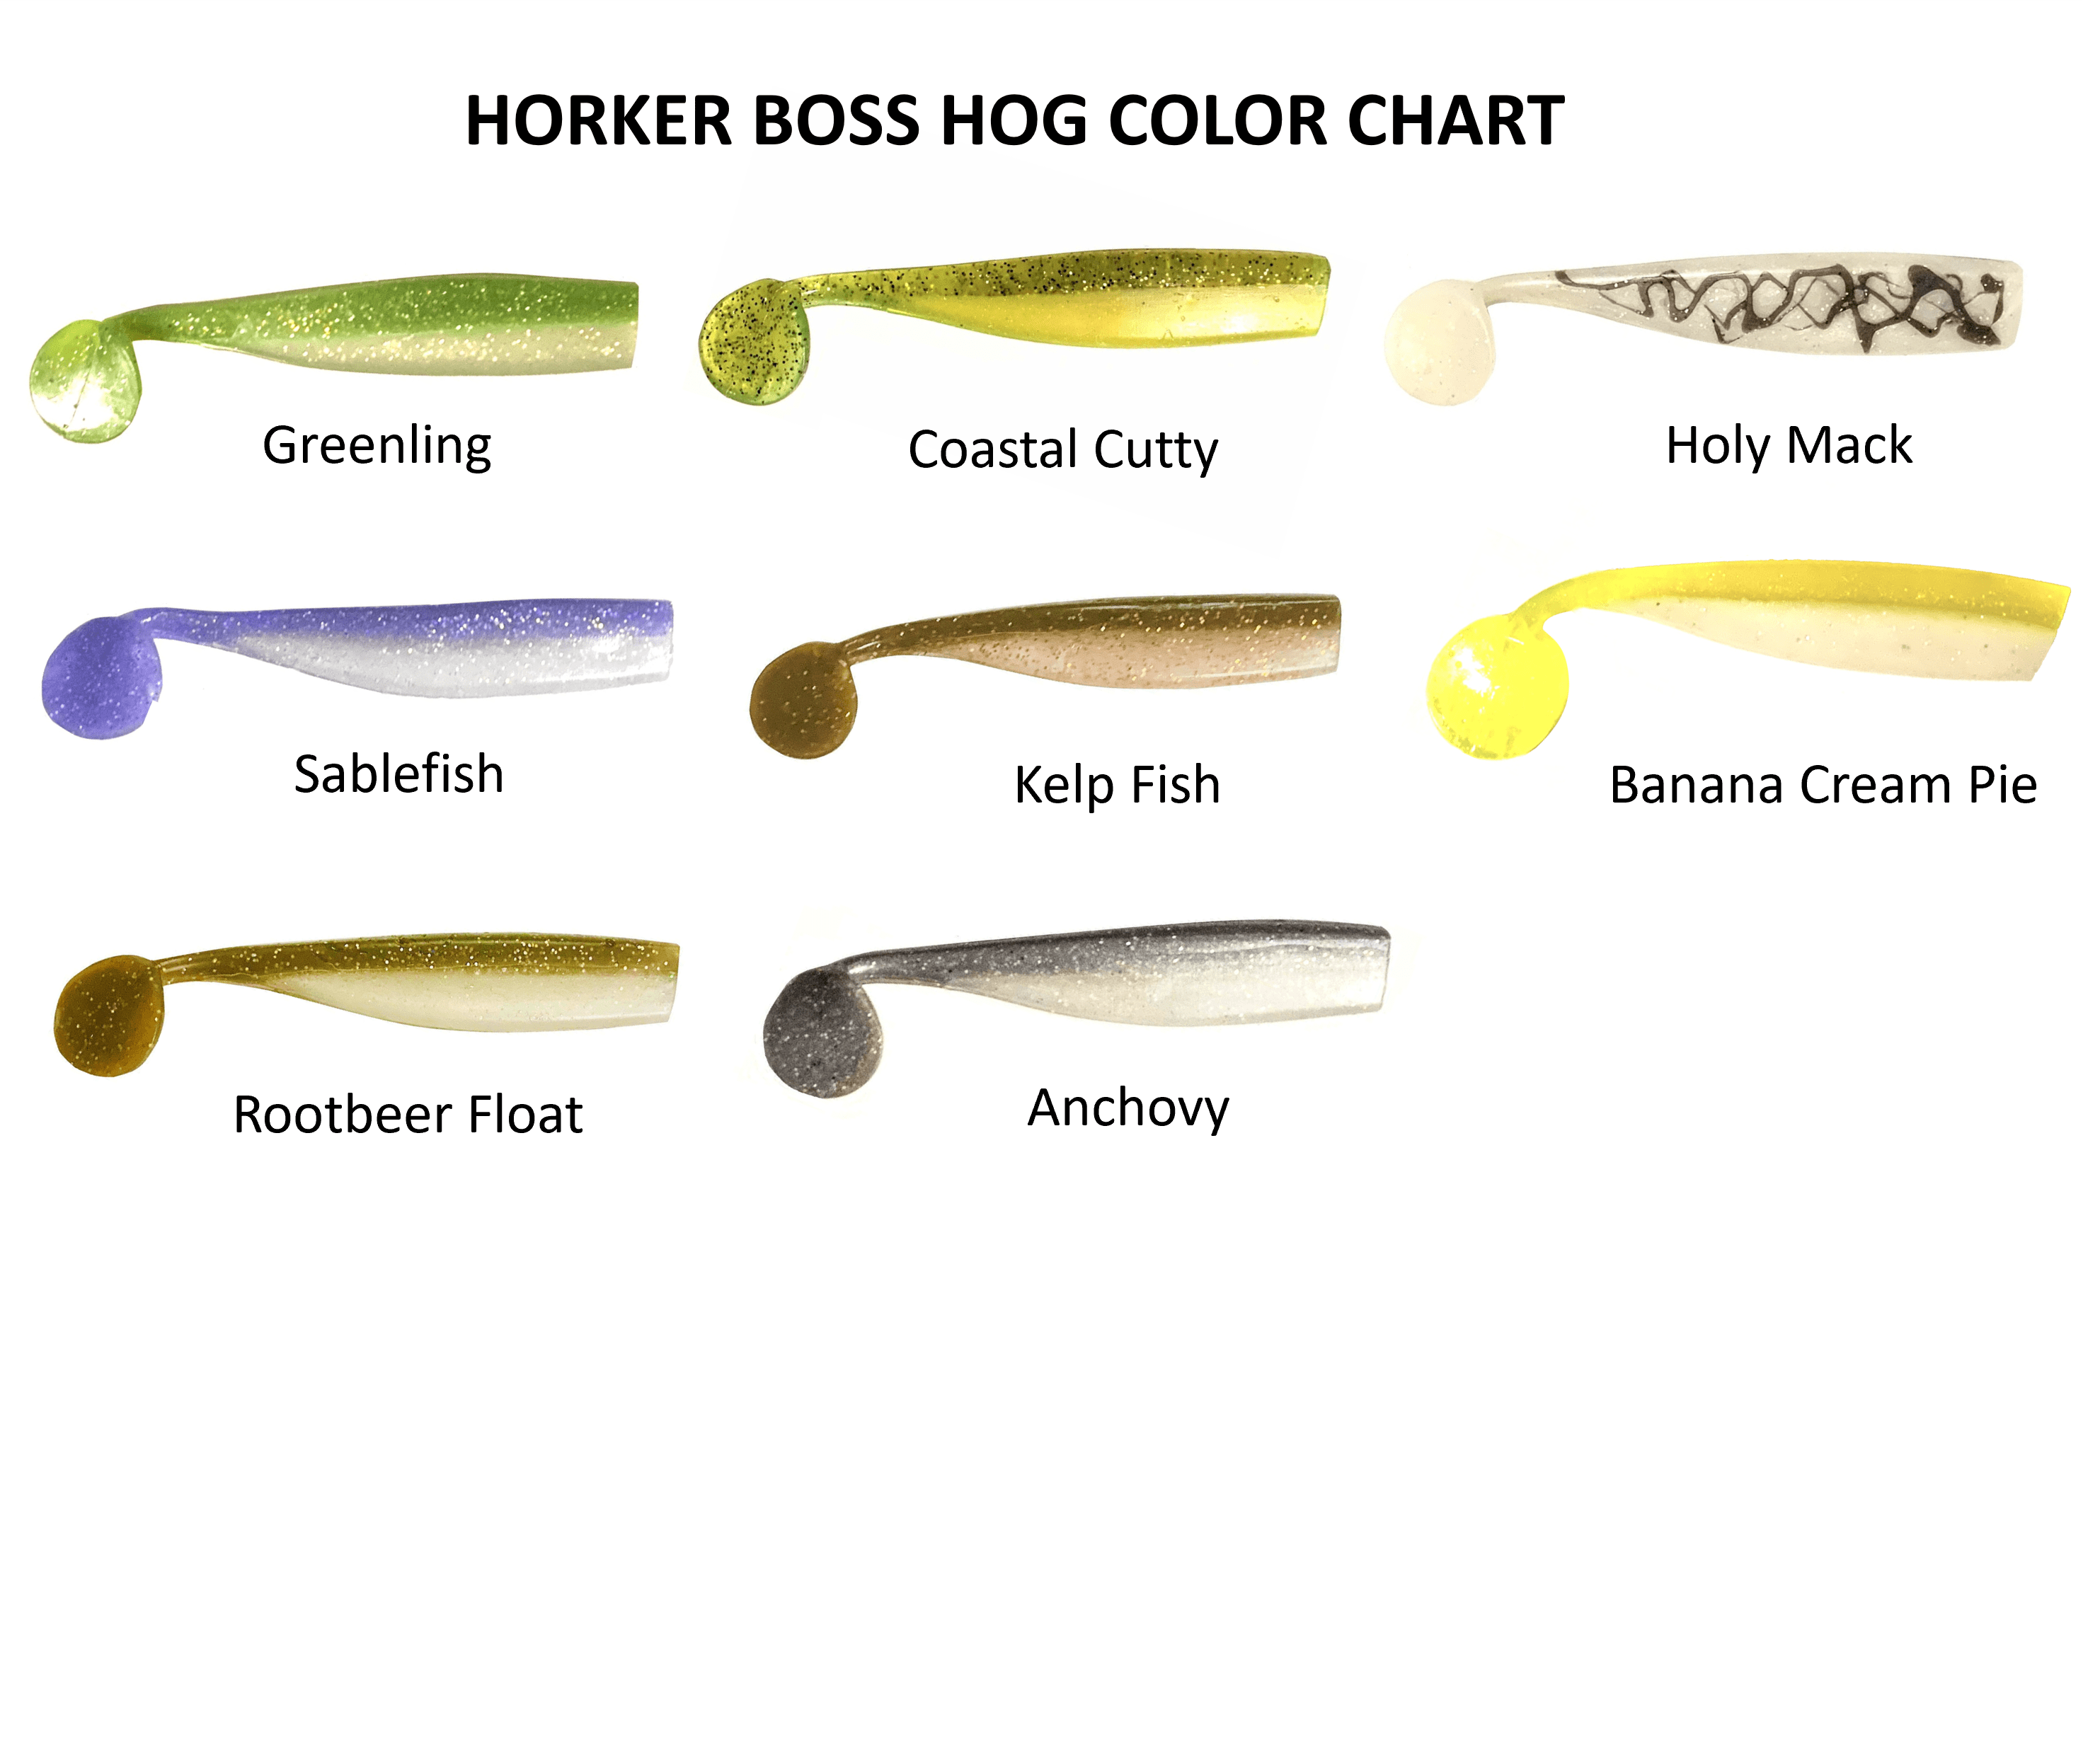 Two Color Boss Hog 9 inch Paddle Tail Swim Bait